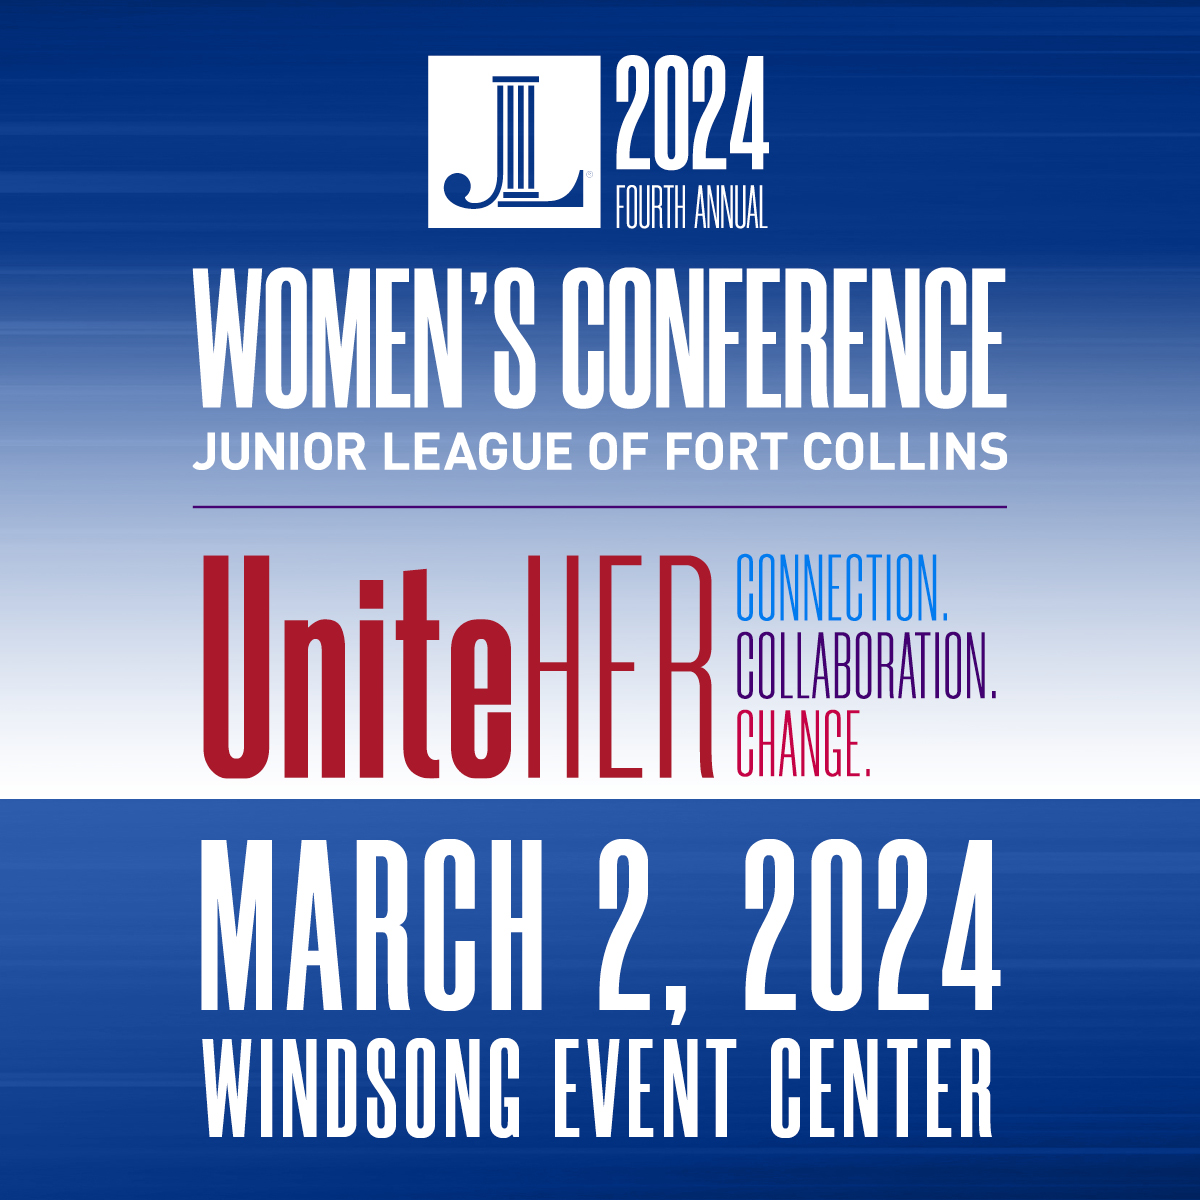 2024 Women’s Conference presented by the Junior League of Fort Collins